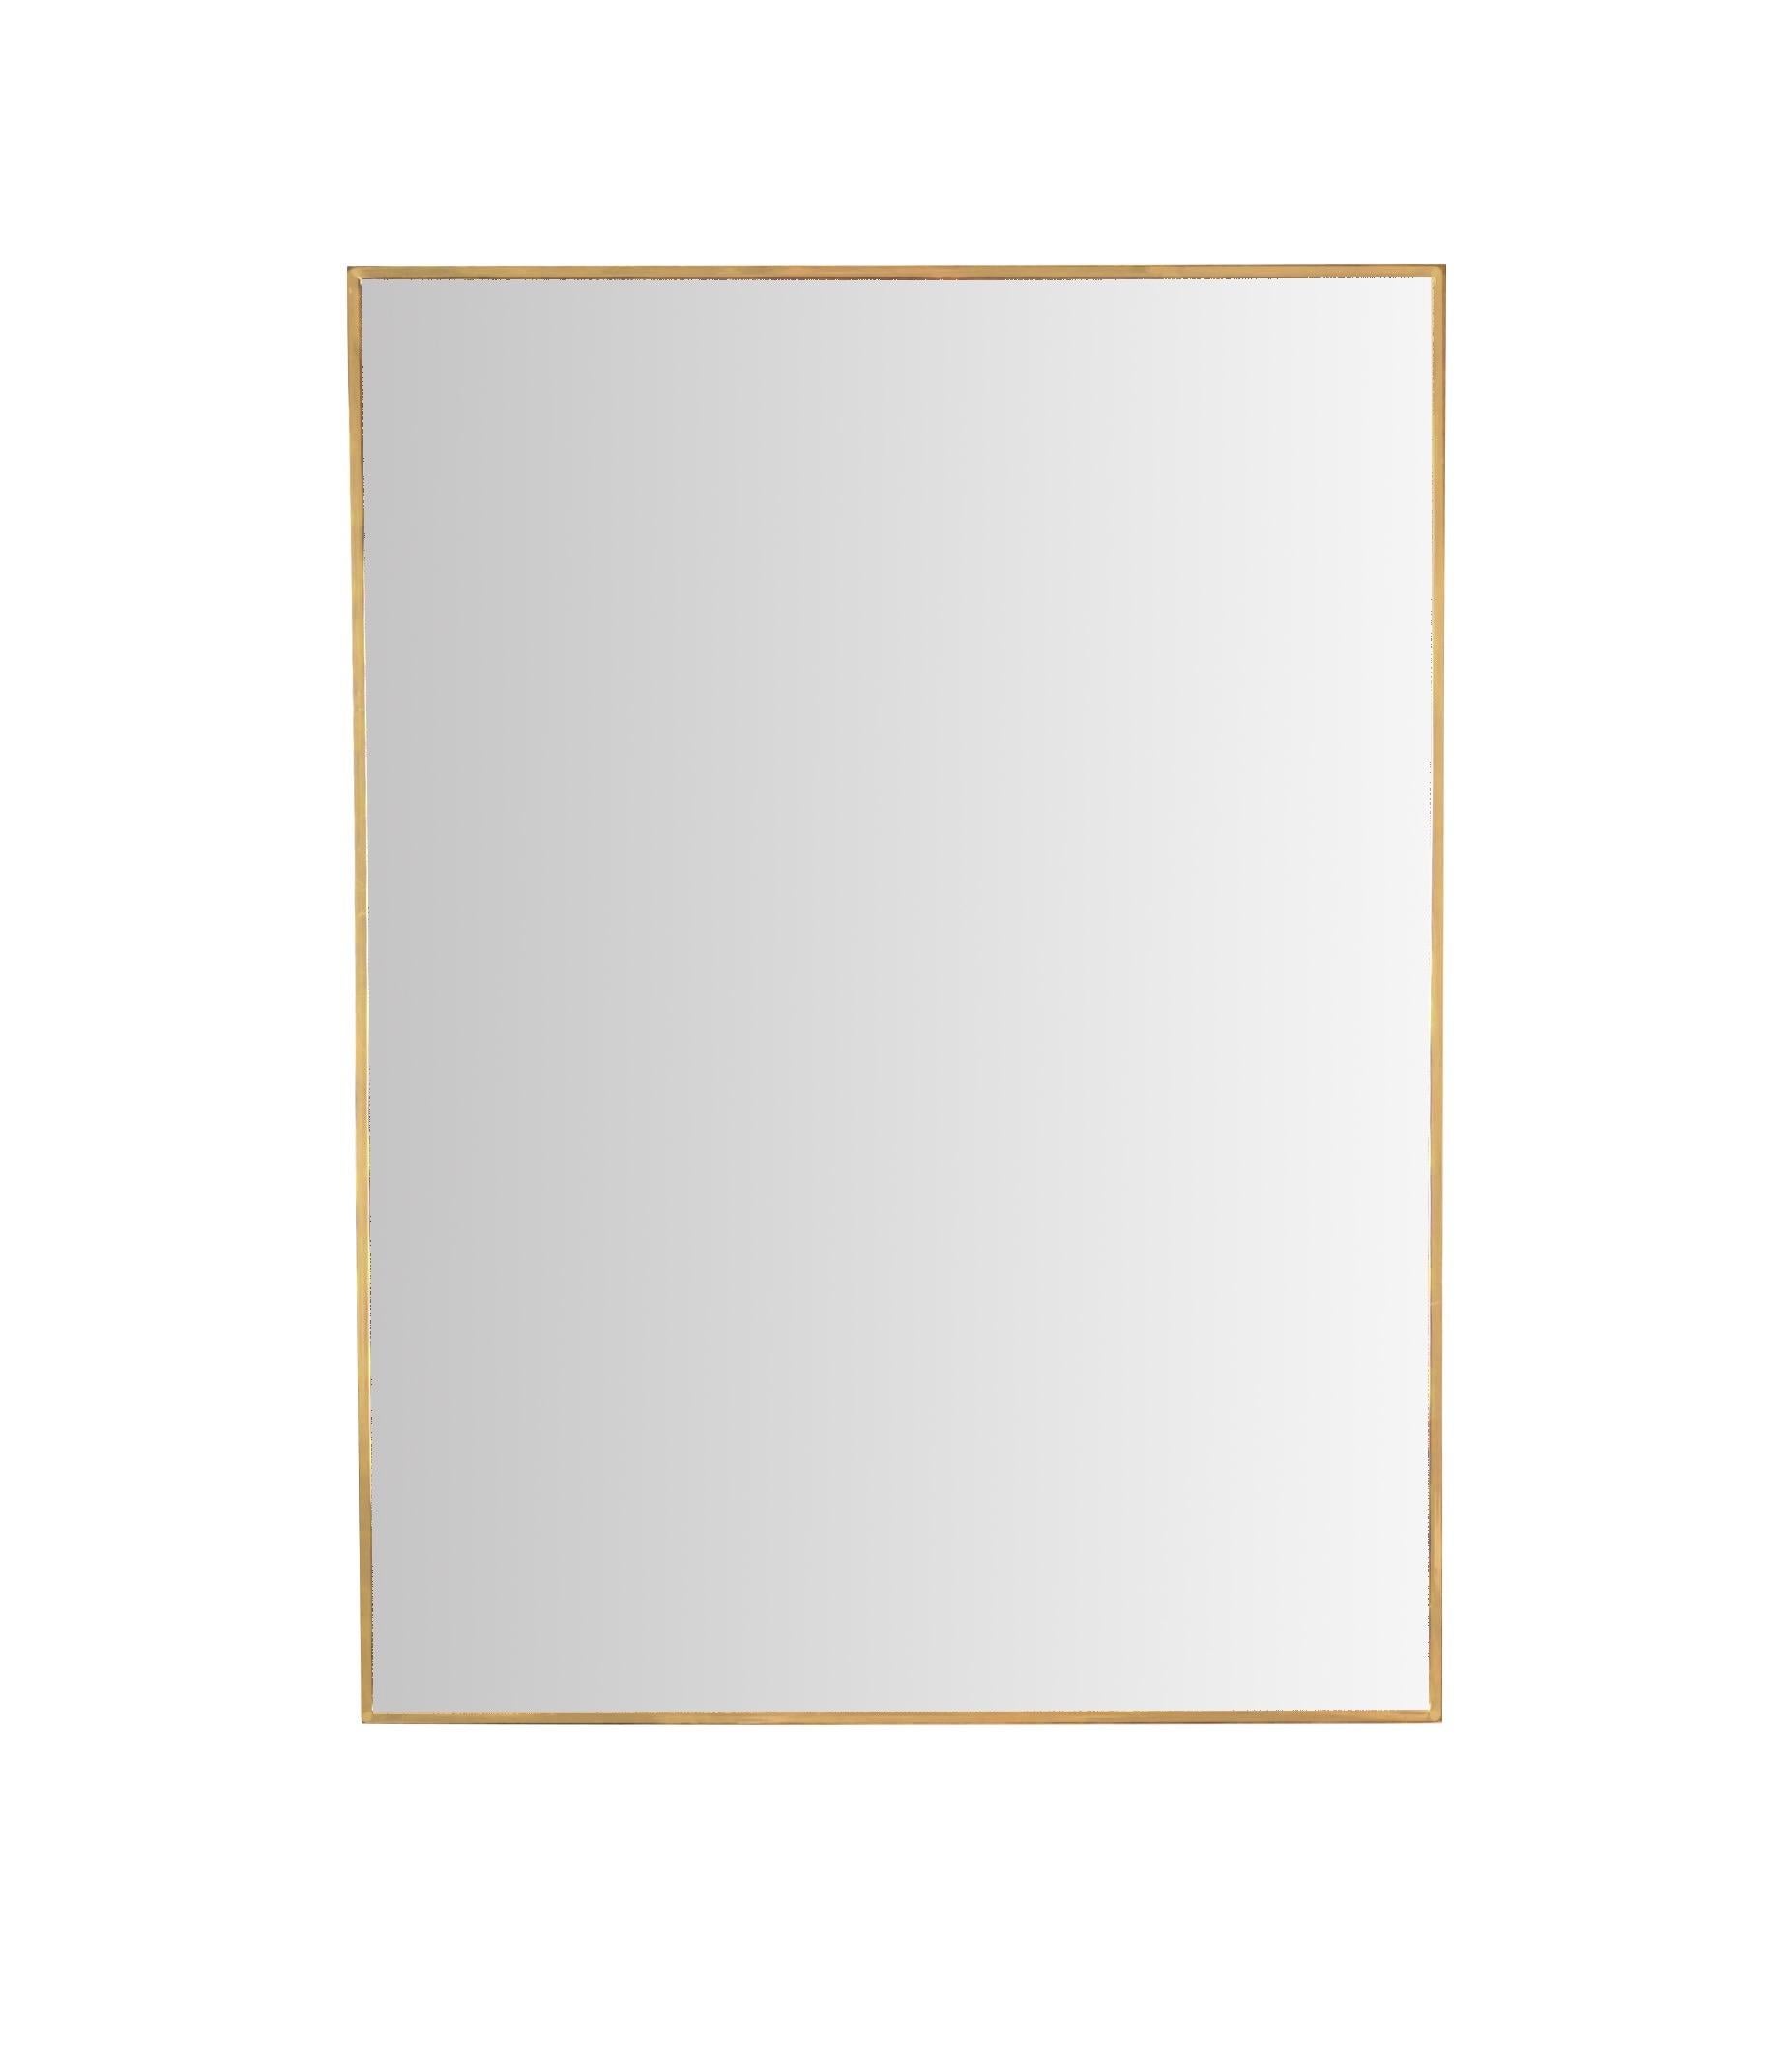 Beautiful large rectangular mirror with a solid brass frame. This elegant mirror was made in Italy during the 1950s.

This beautiful mirror has an rectangular frame made in solid brass, which makes it pretty heavy. The brass has a wonderful golden